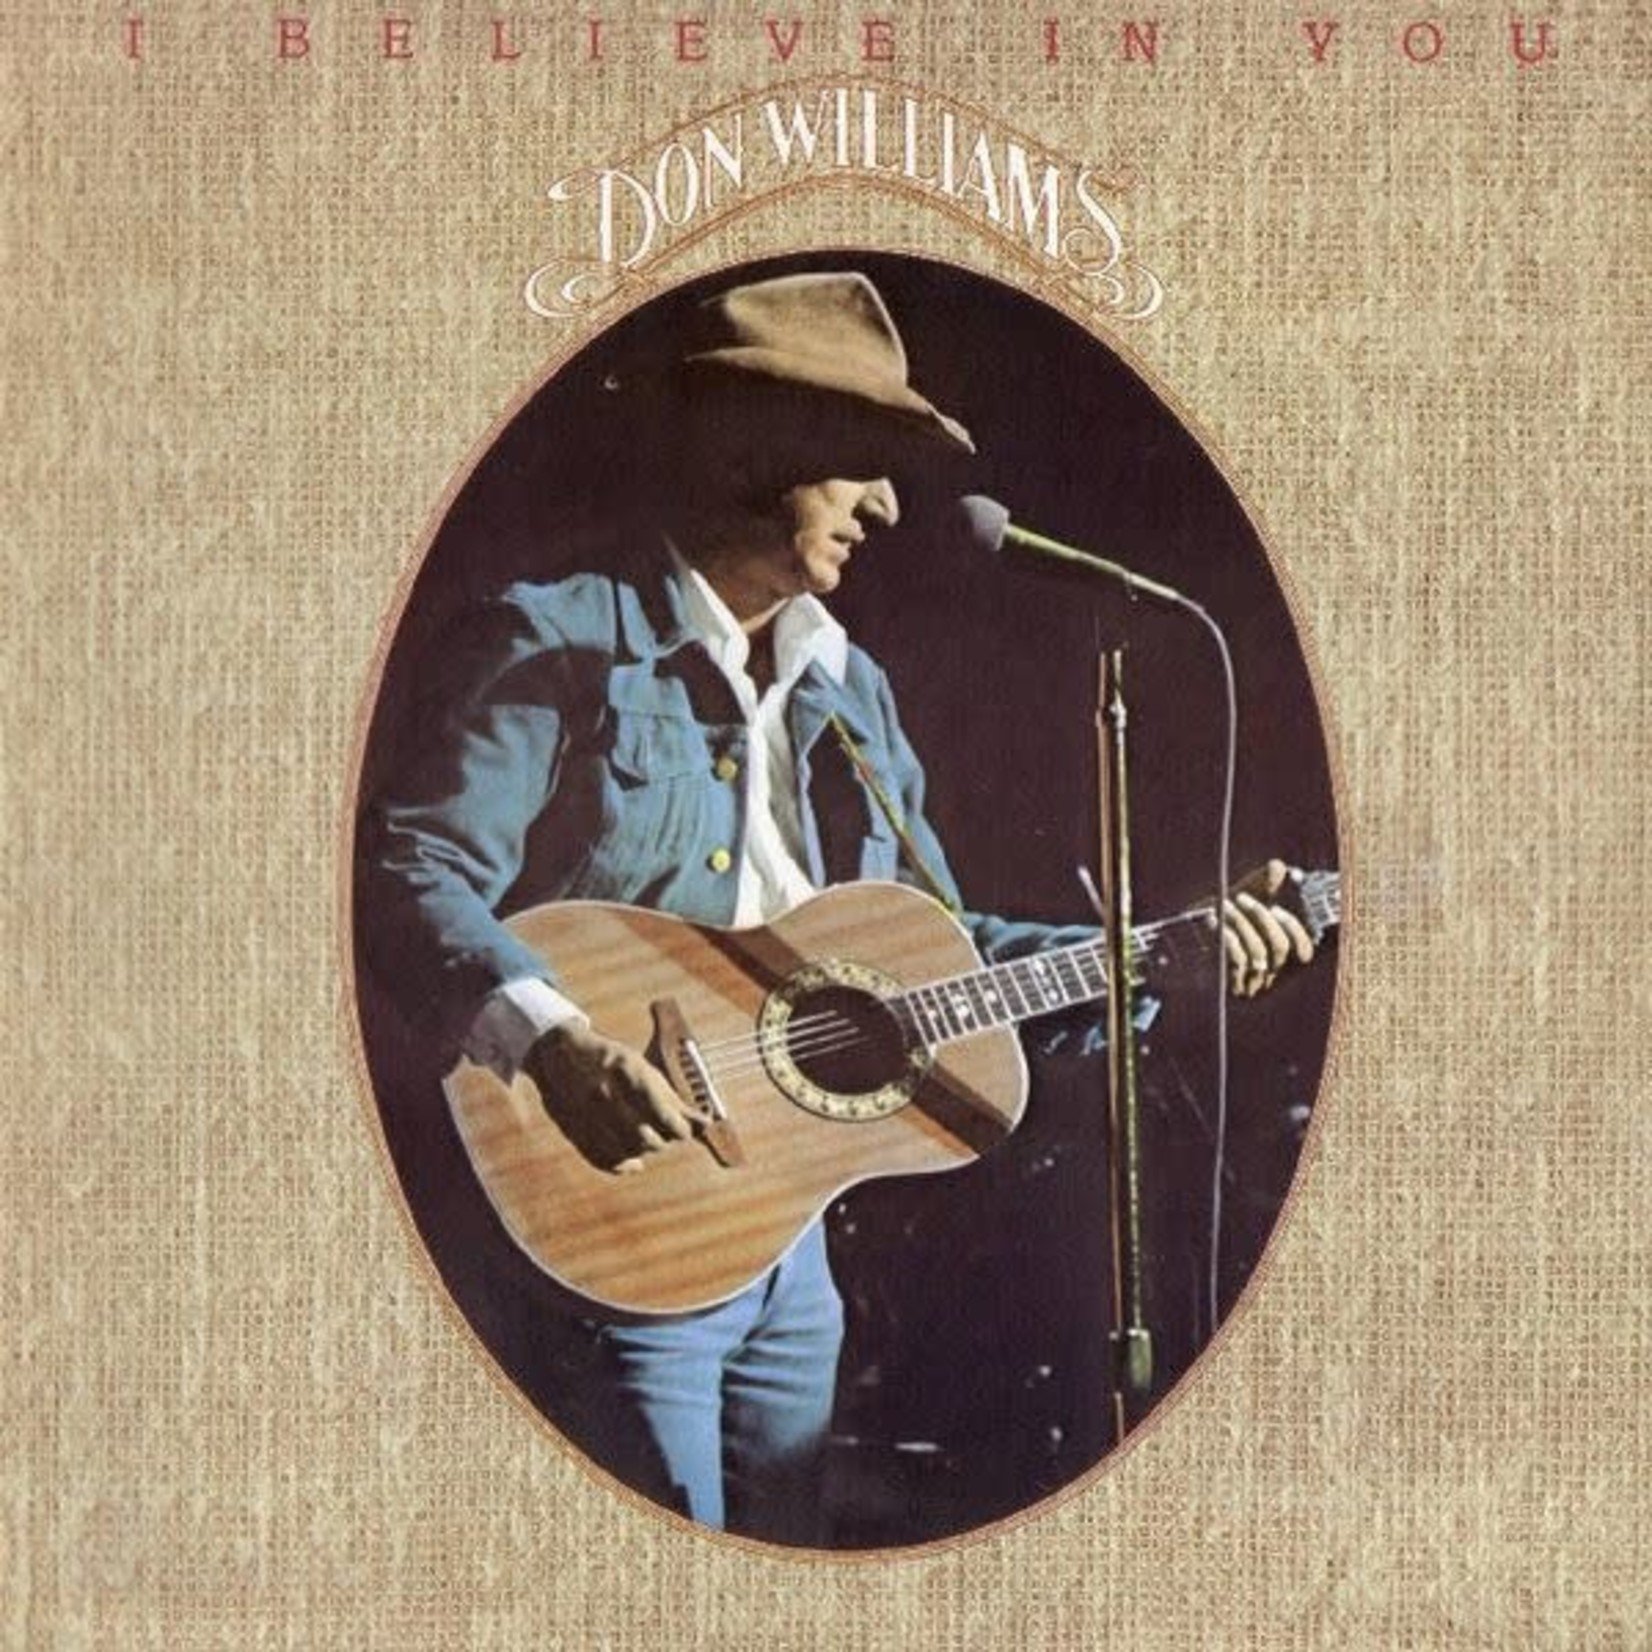 [Vintage] Don Williams - I Believe in You